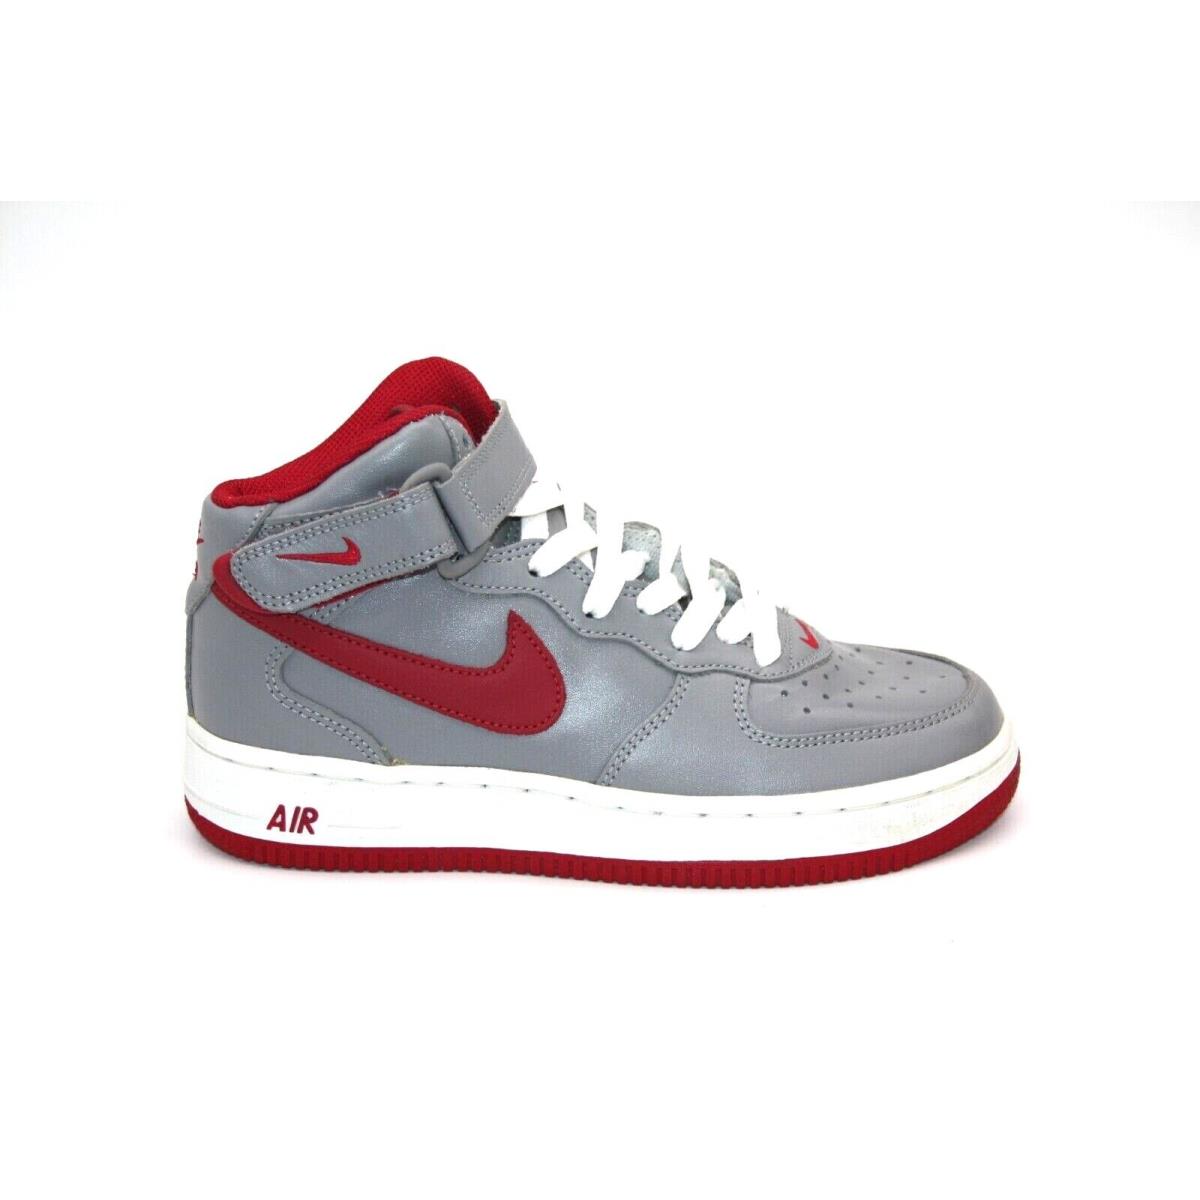 Nike Air Force 1 Mid GS 306603-061 Medium Grey/varsity Red-white Size 5